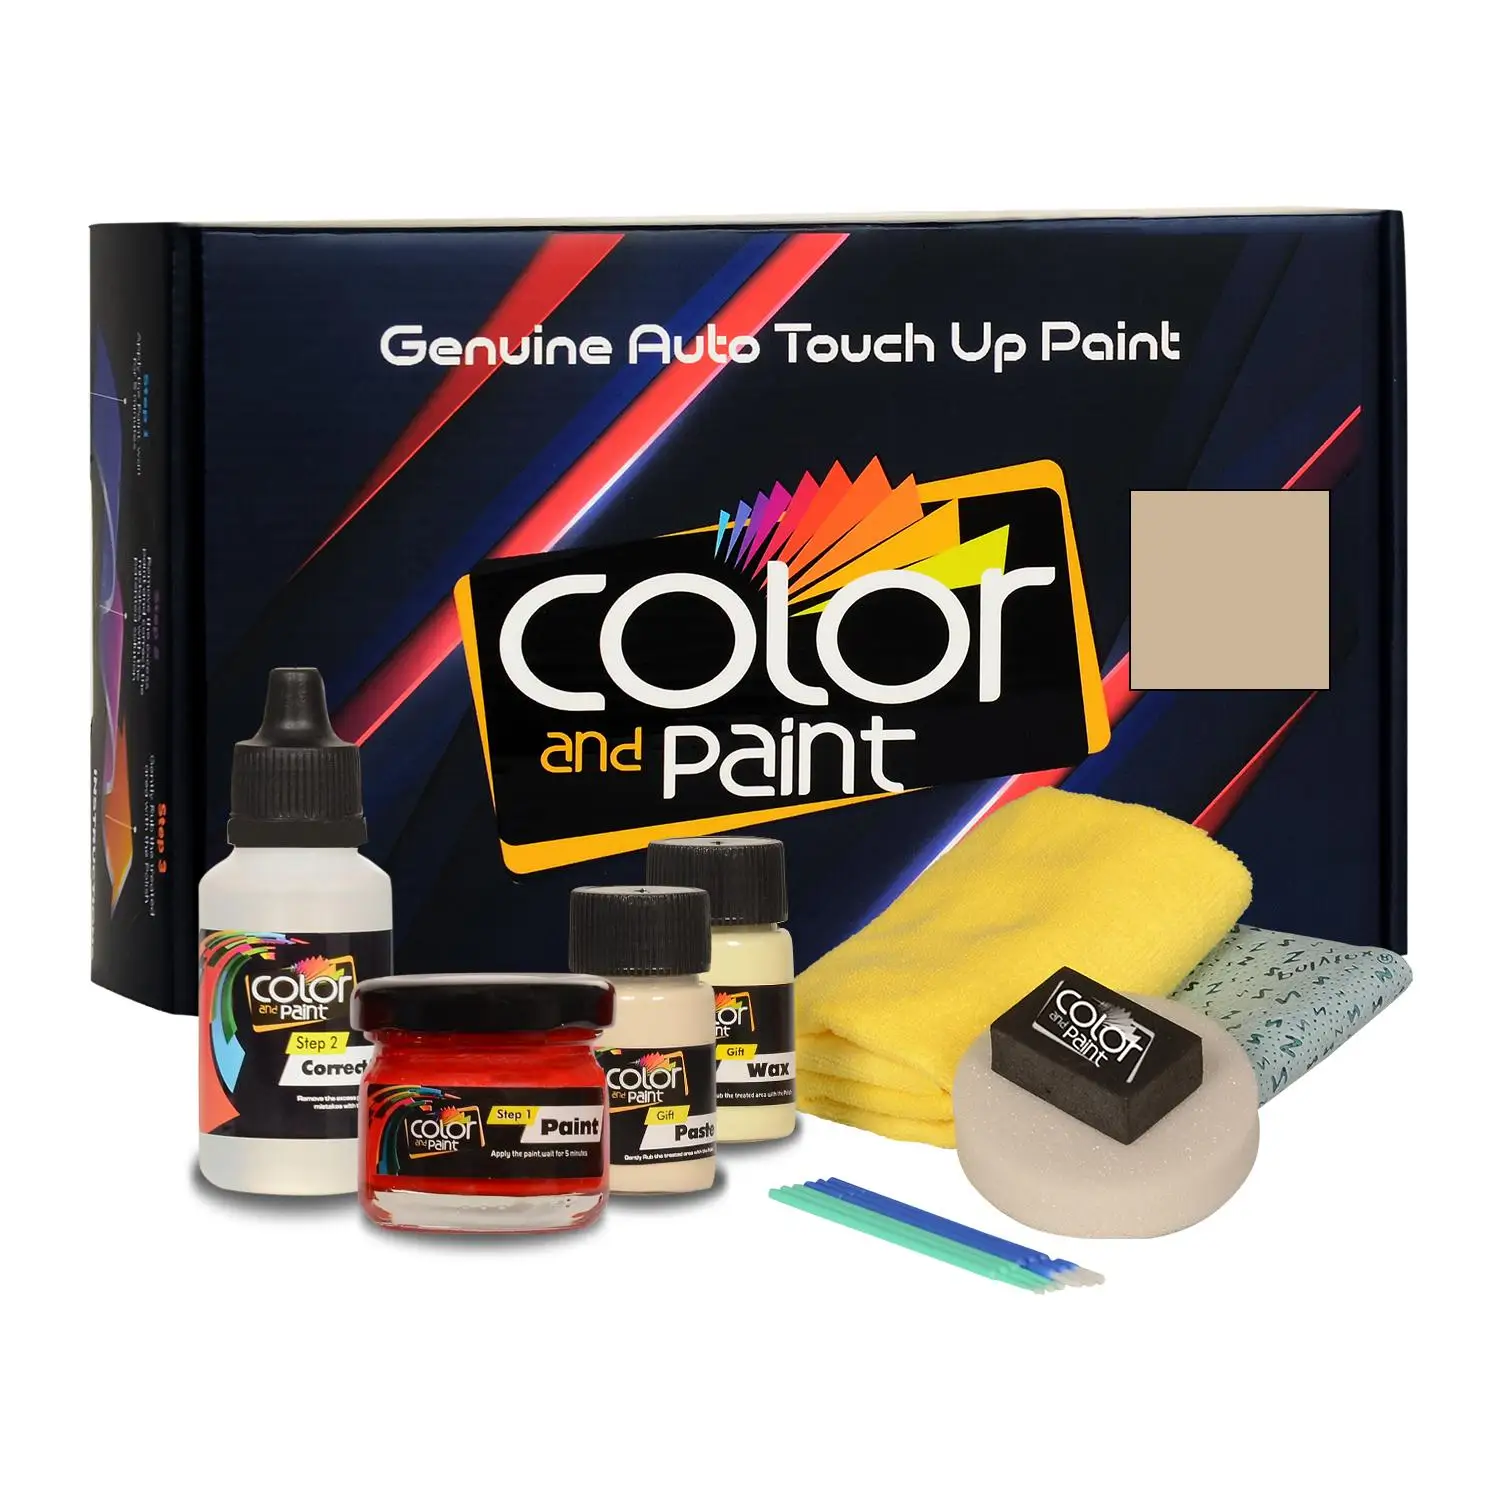 

Color and Paint compatible with Land Rover Automotive Touch Up Paint - MAYA GOLD MET - GAN - Basic Care